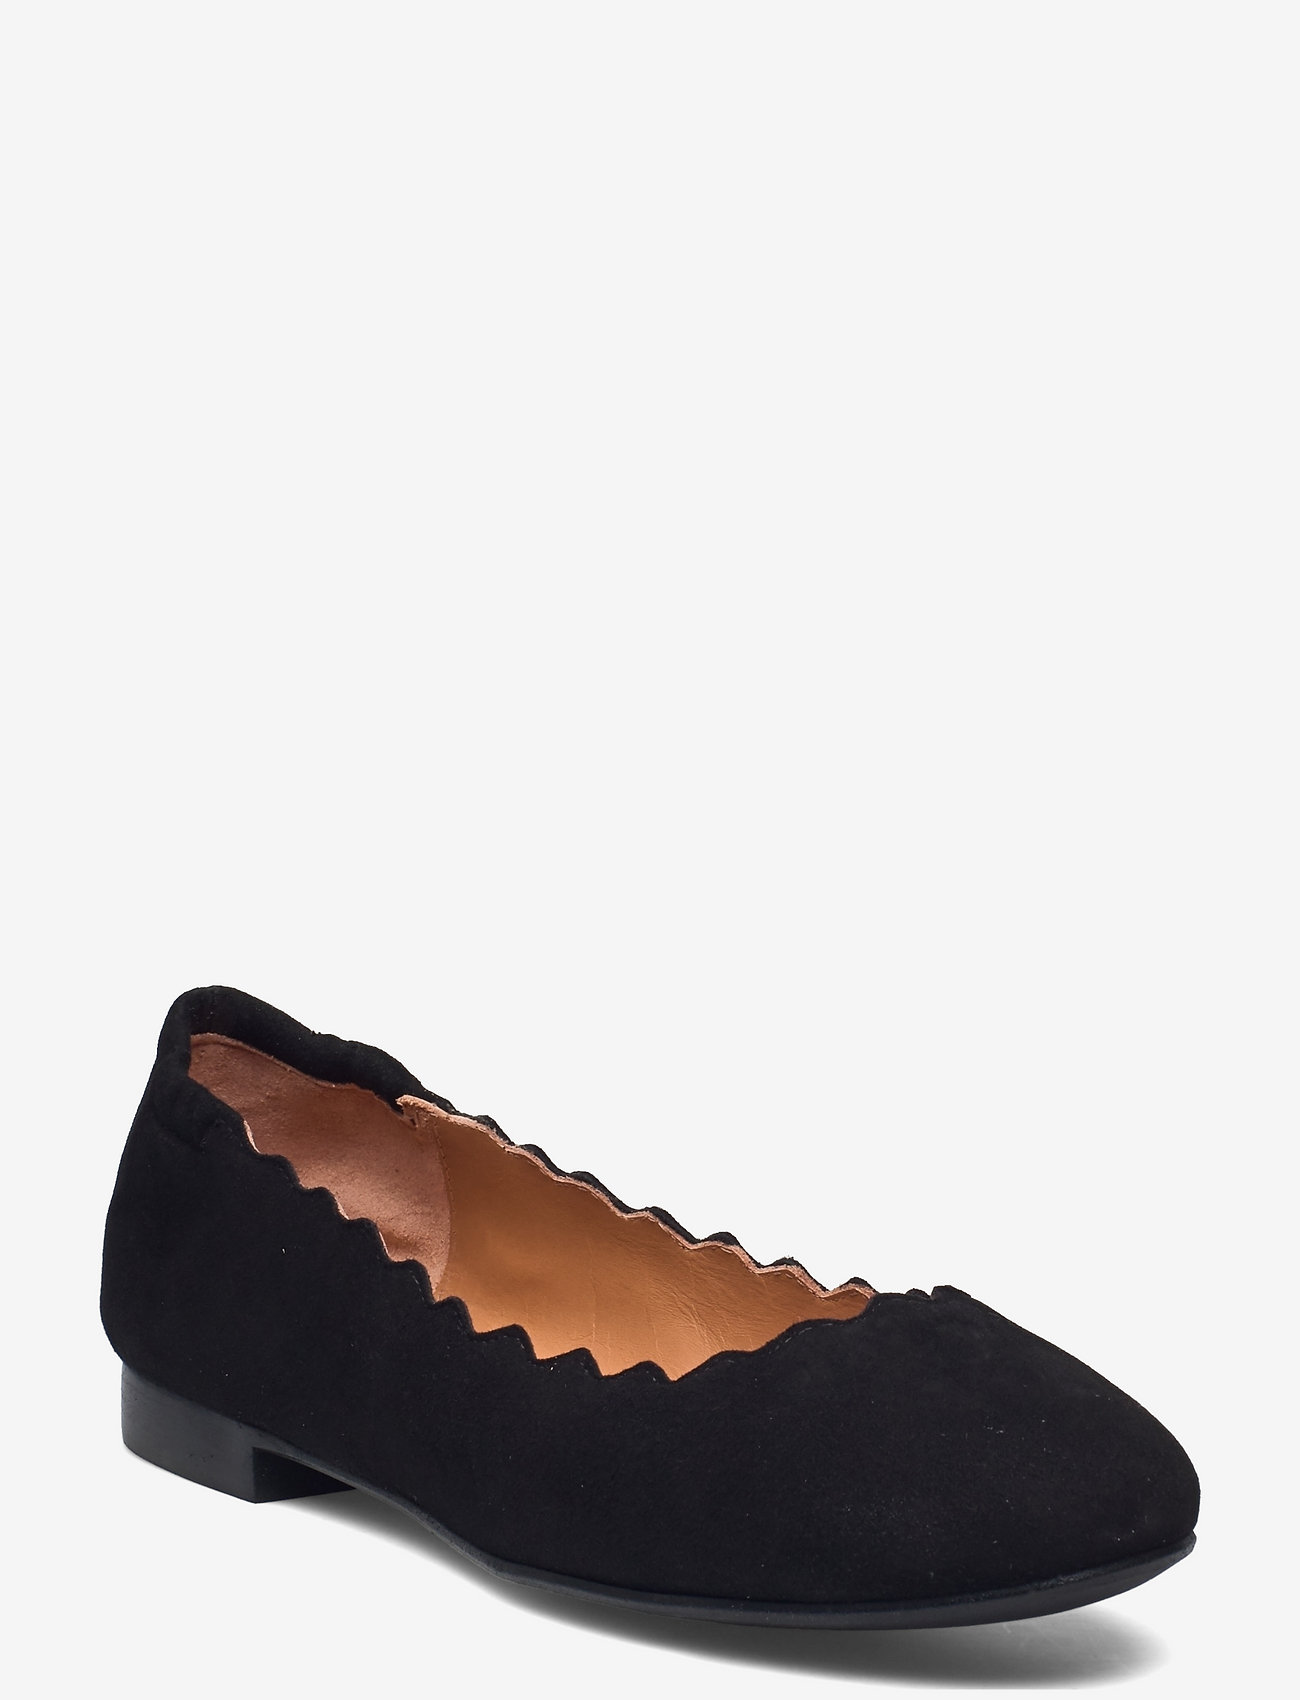 Billi Bi - A1904 - party wear at outlet prices - black suede 50 - 0